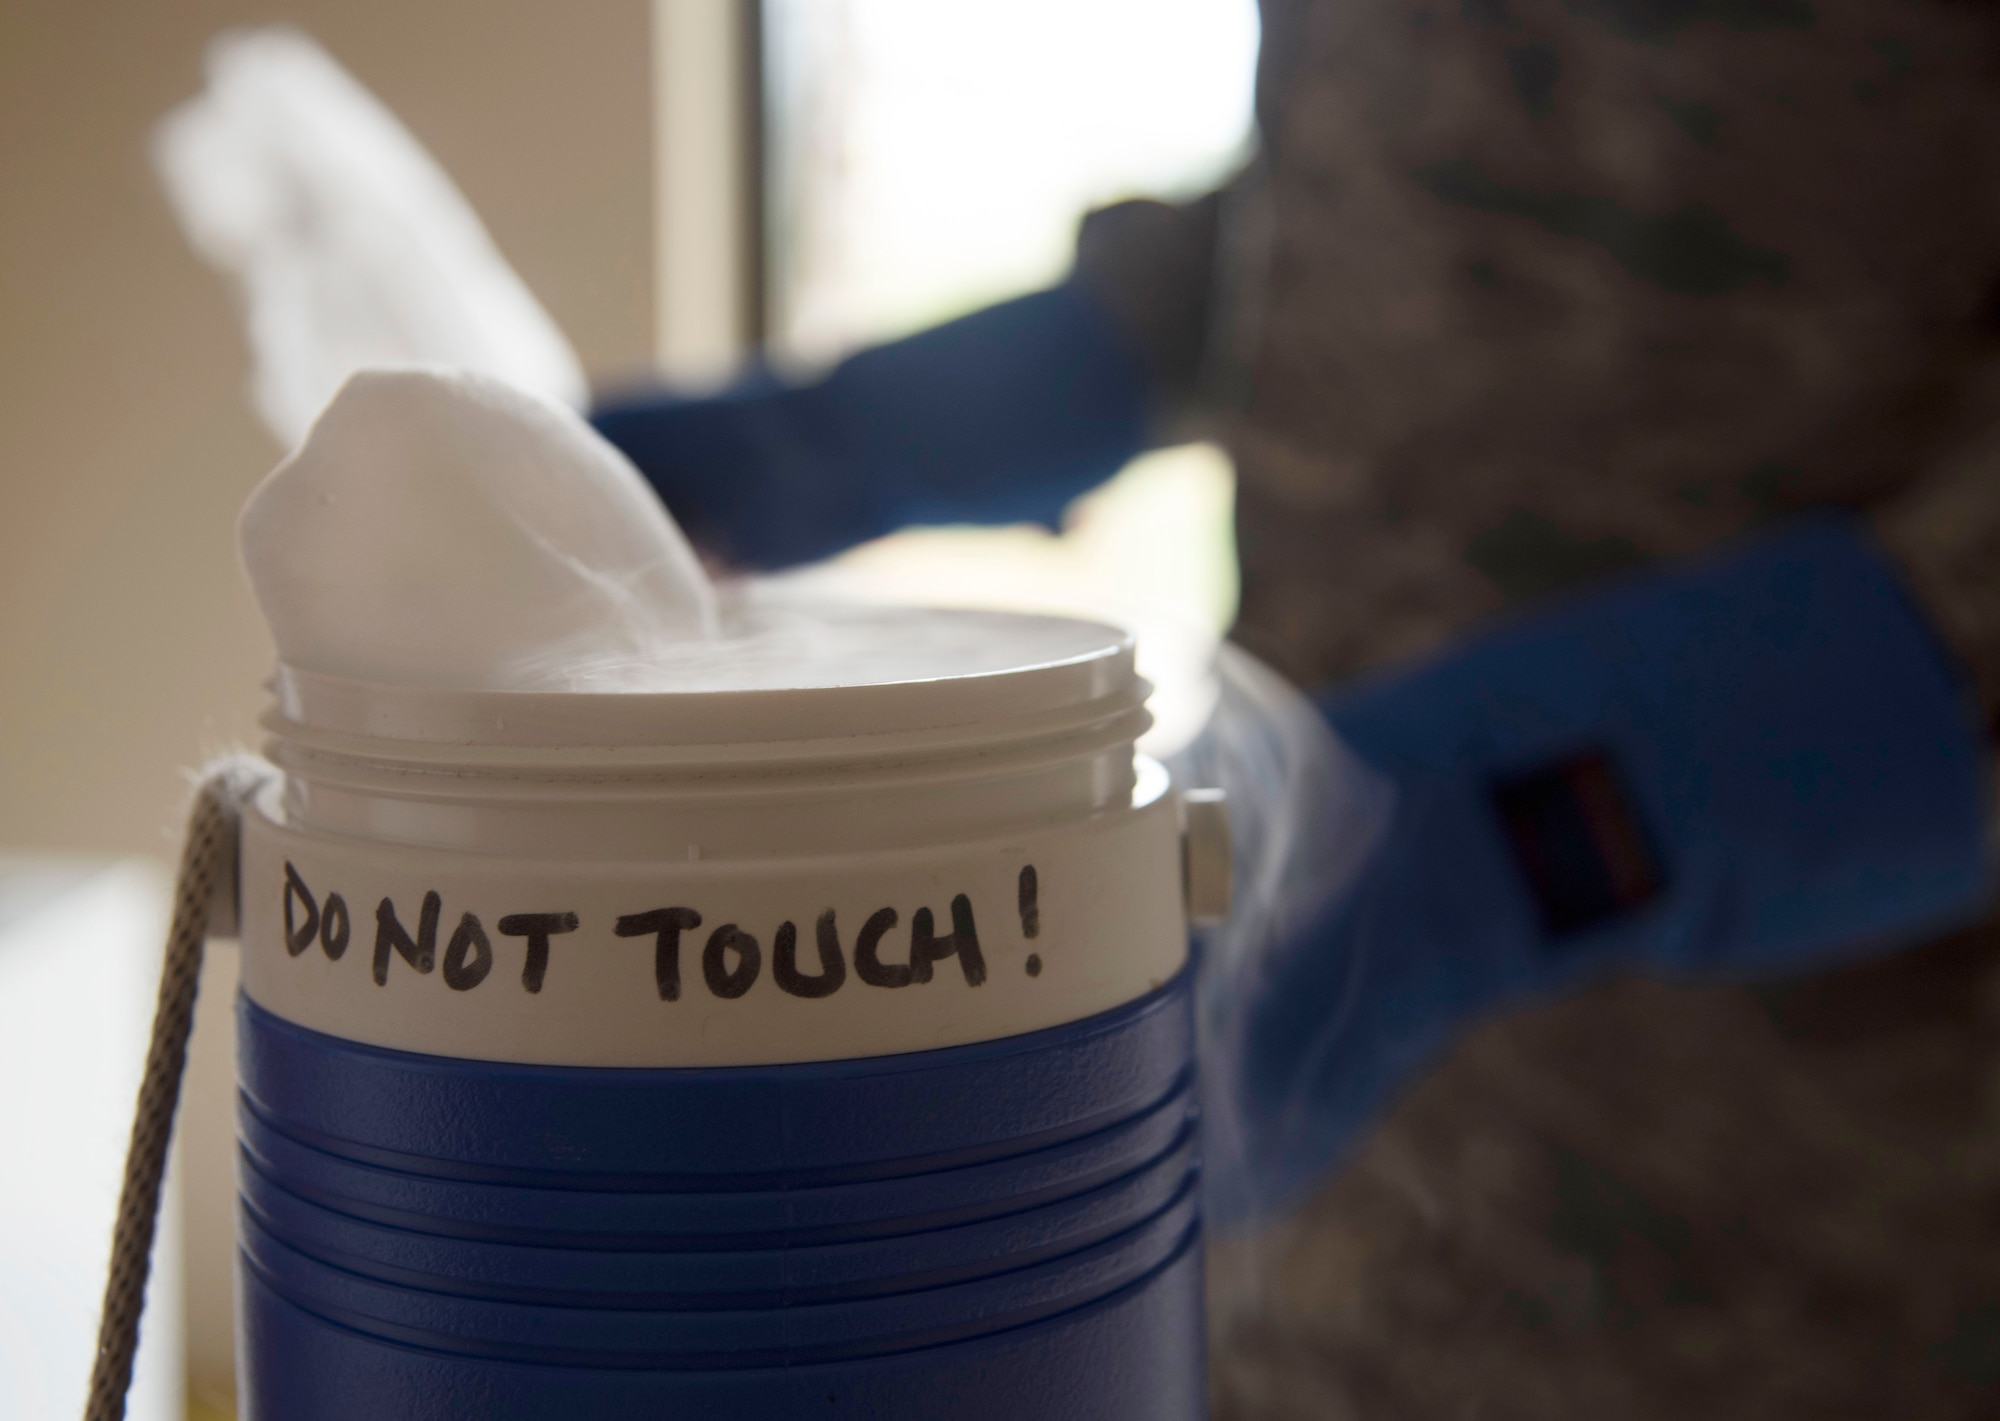 U.S. Air Force Staff Sgt. Cornelius Bransah, the NCO in charge of food safety and sanitation assigned to the 6th Aerospace Medical Squadron, fills a small cooler with dry ice to use as bait for a mosquito trap at MacDill Air Force Base, Fla., June 13, 2017. Dry ice is solid carbon dioxide which sublimates, producing carbon dioxide gas, which mimics a human exhaling, attracting mosquitoes toward the trap. (U.S. Air Force photo by Airman 1st Class Adam R. Shanks)